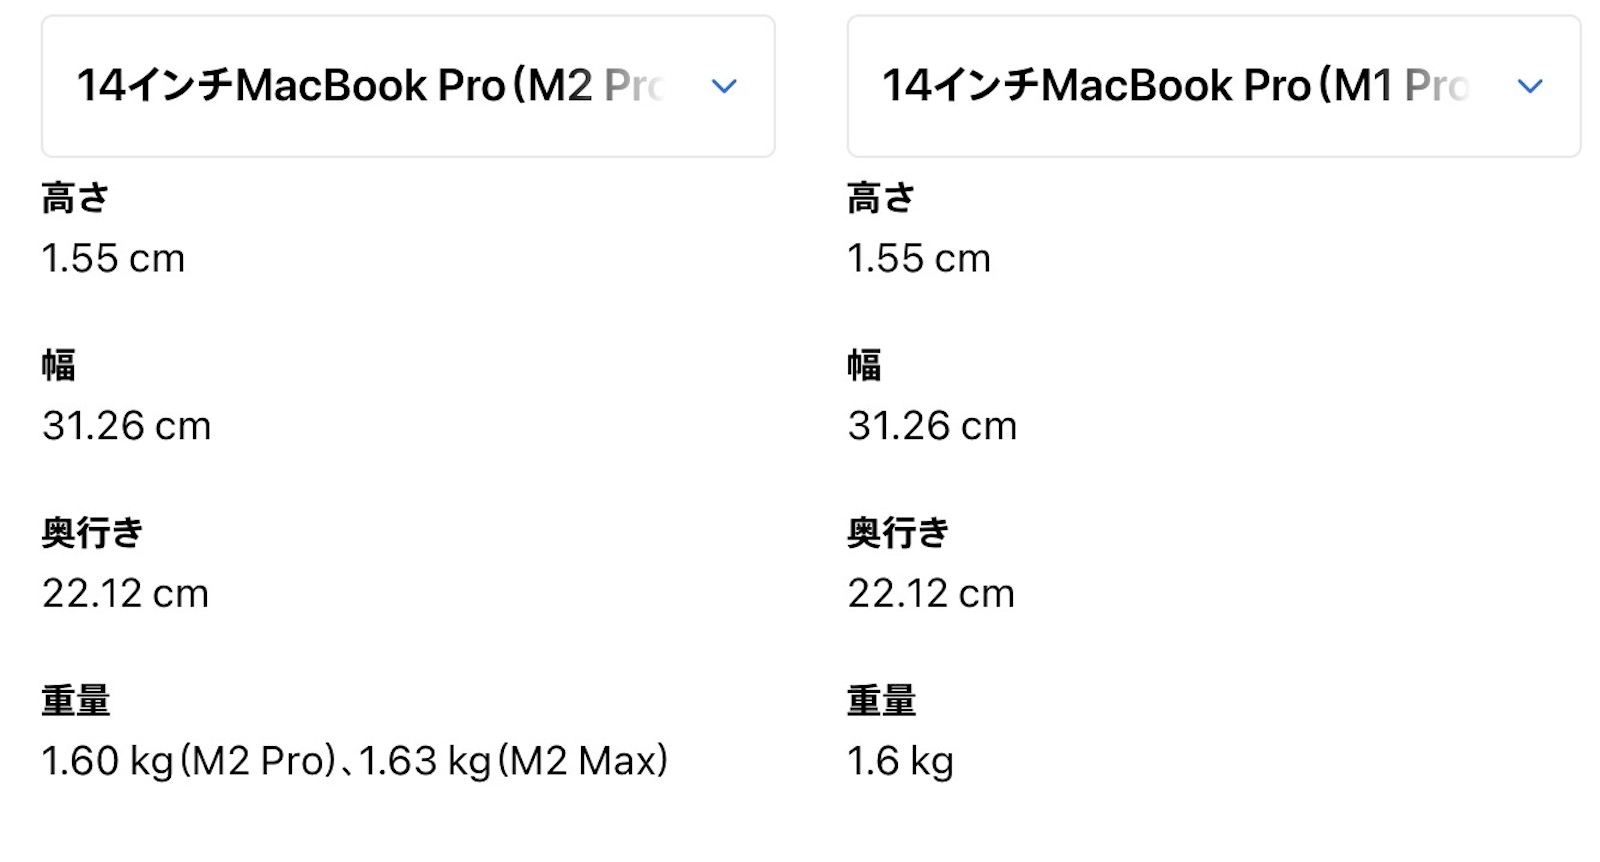 Weight of m2max model is heavier